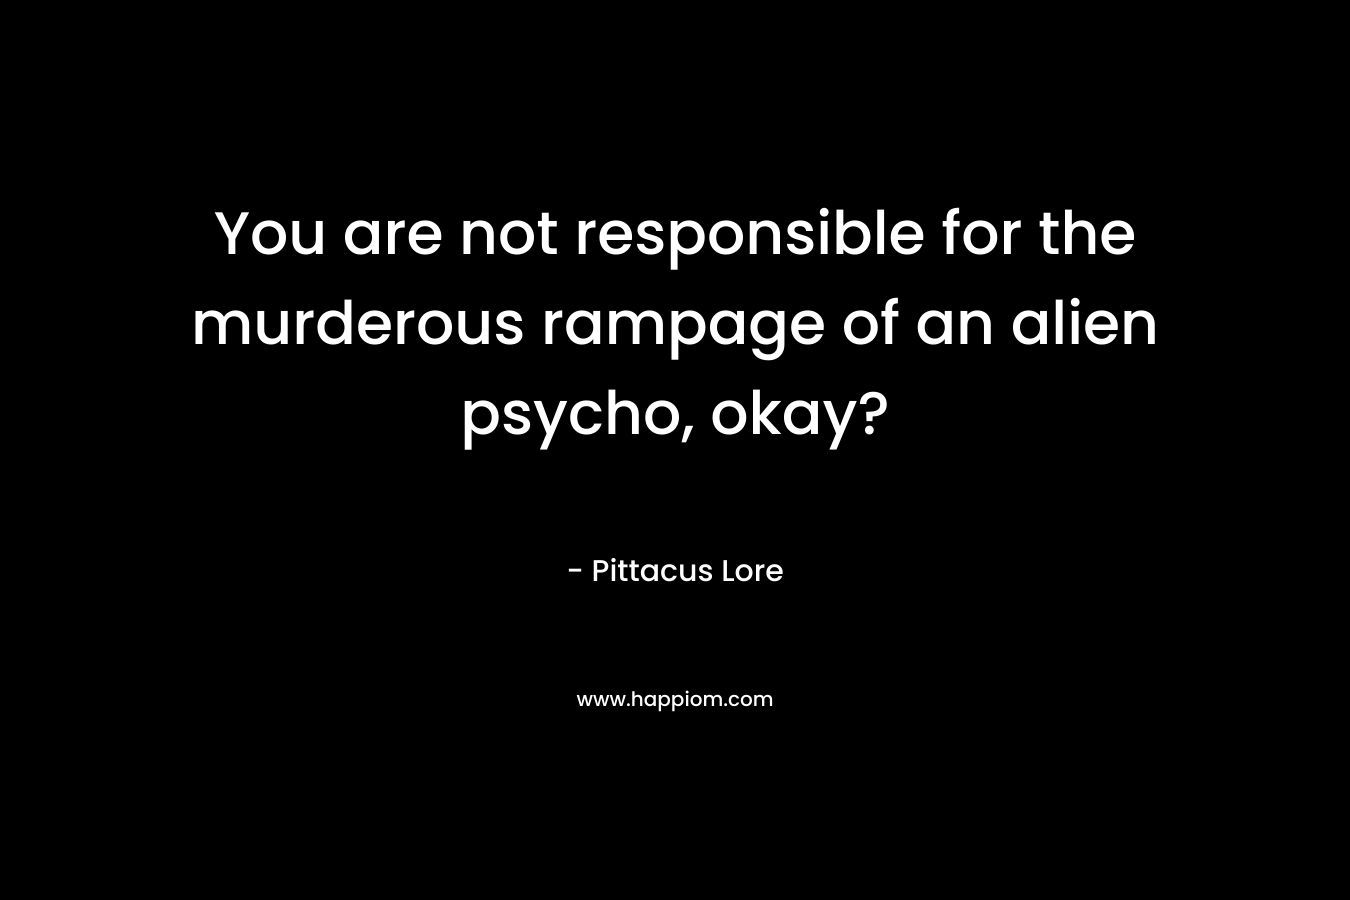 You are not responsible for the murderous rampage of an alien psycho, okay?